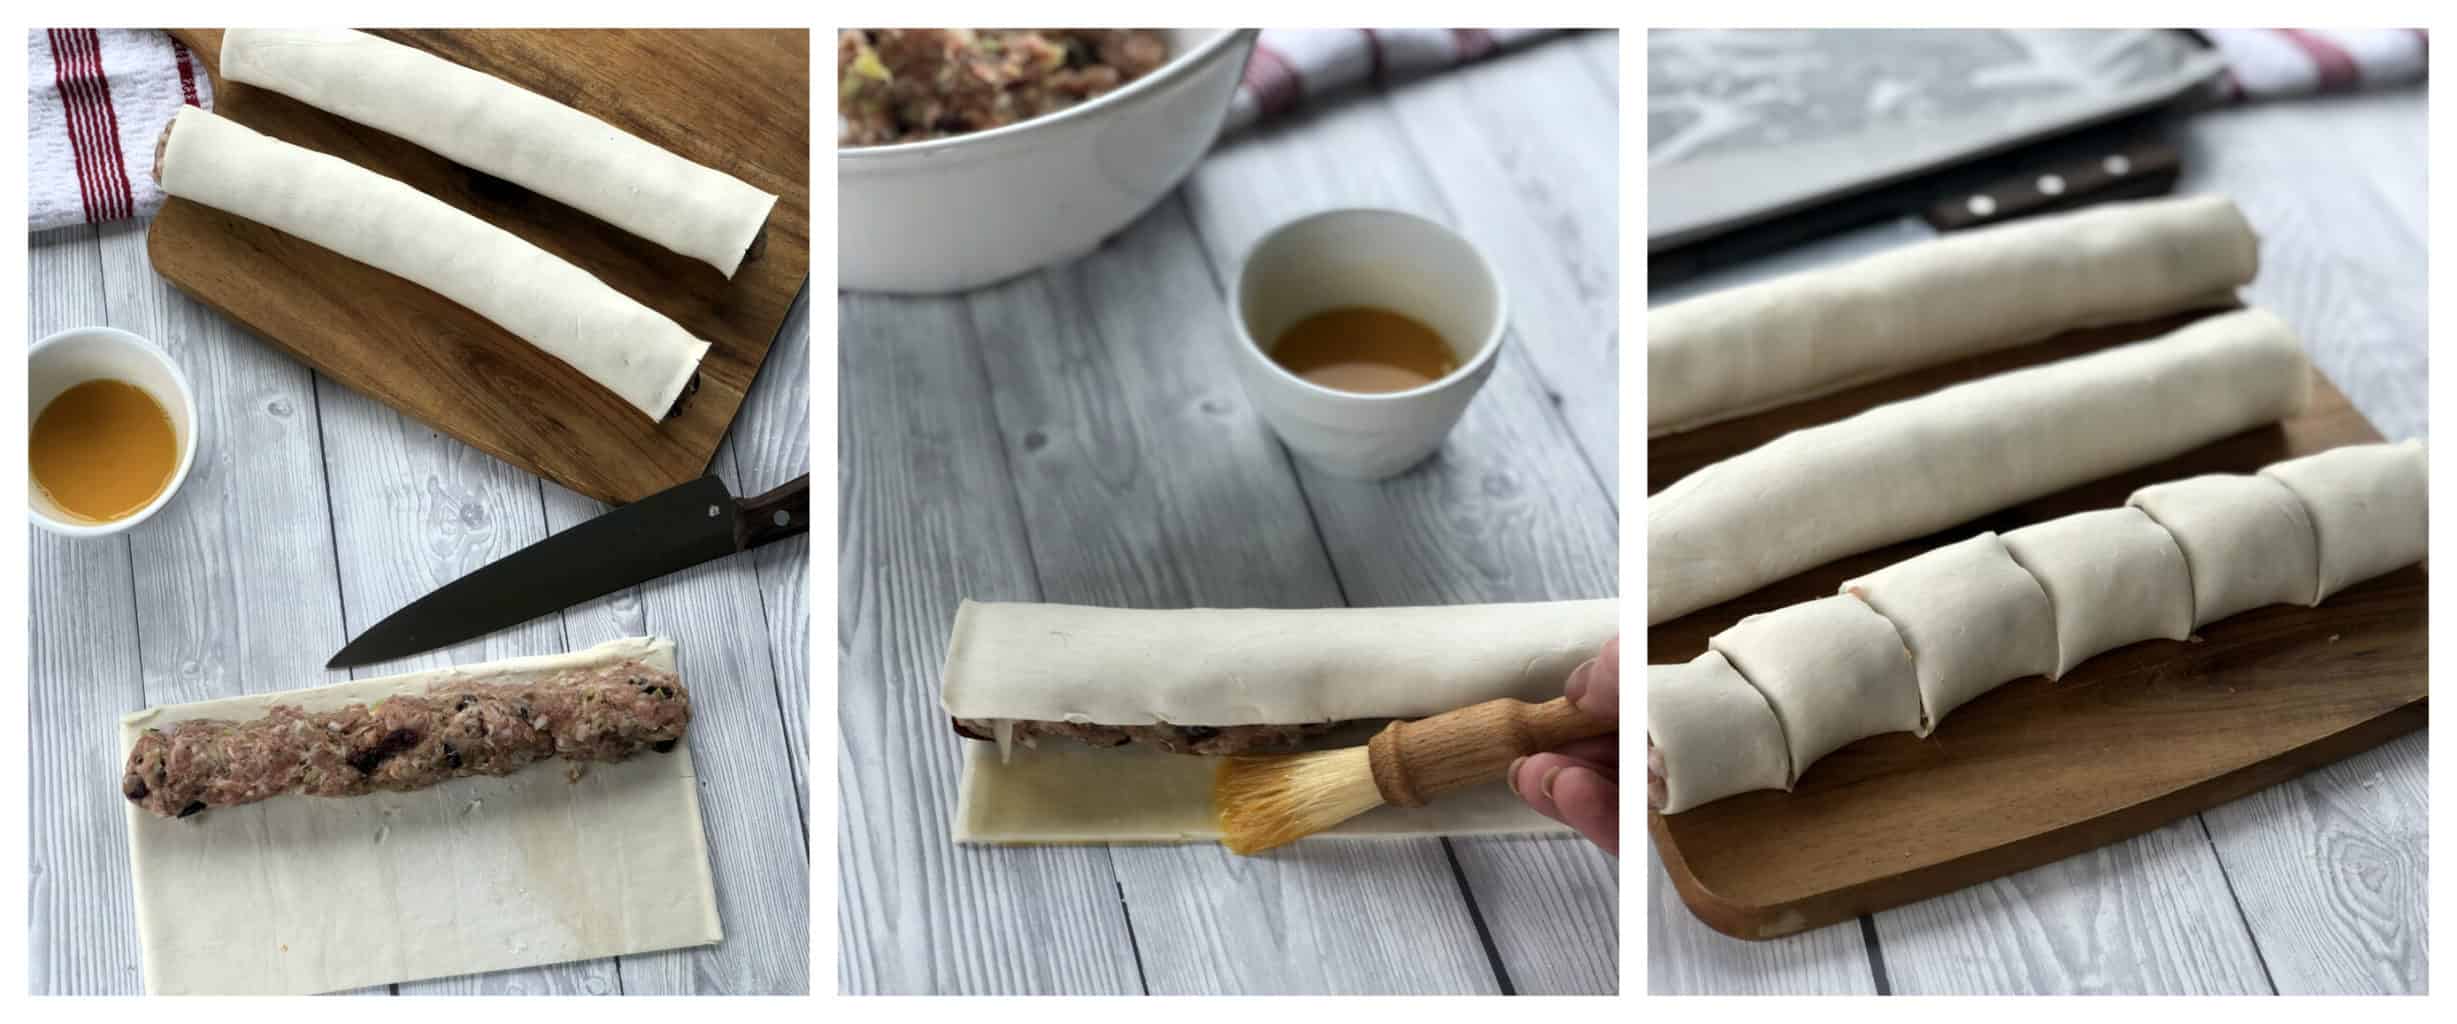 How to roll sausage rolls 